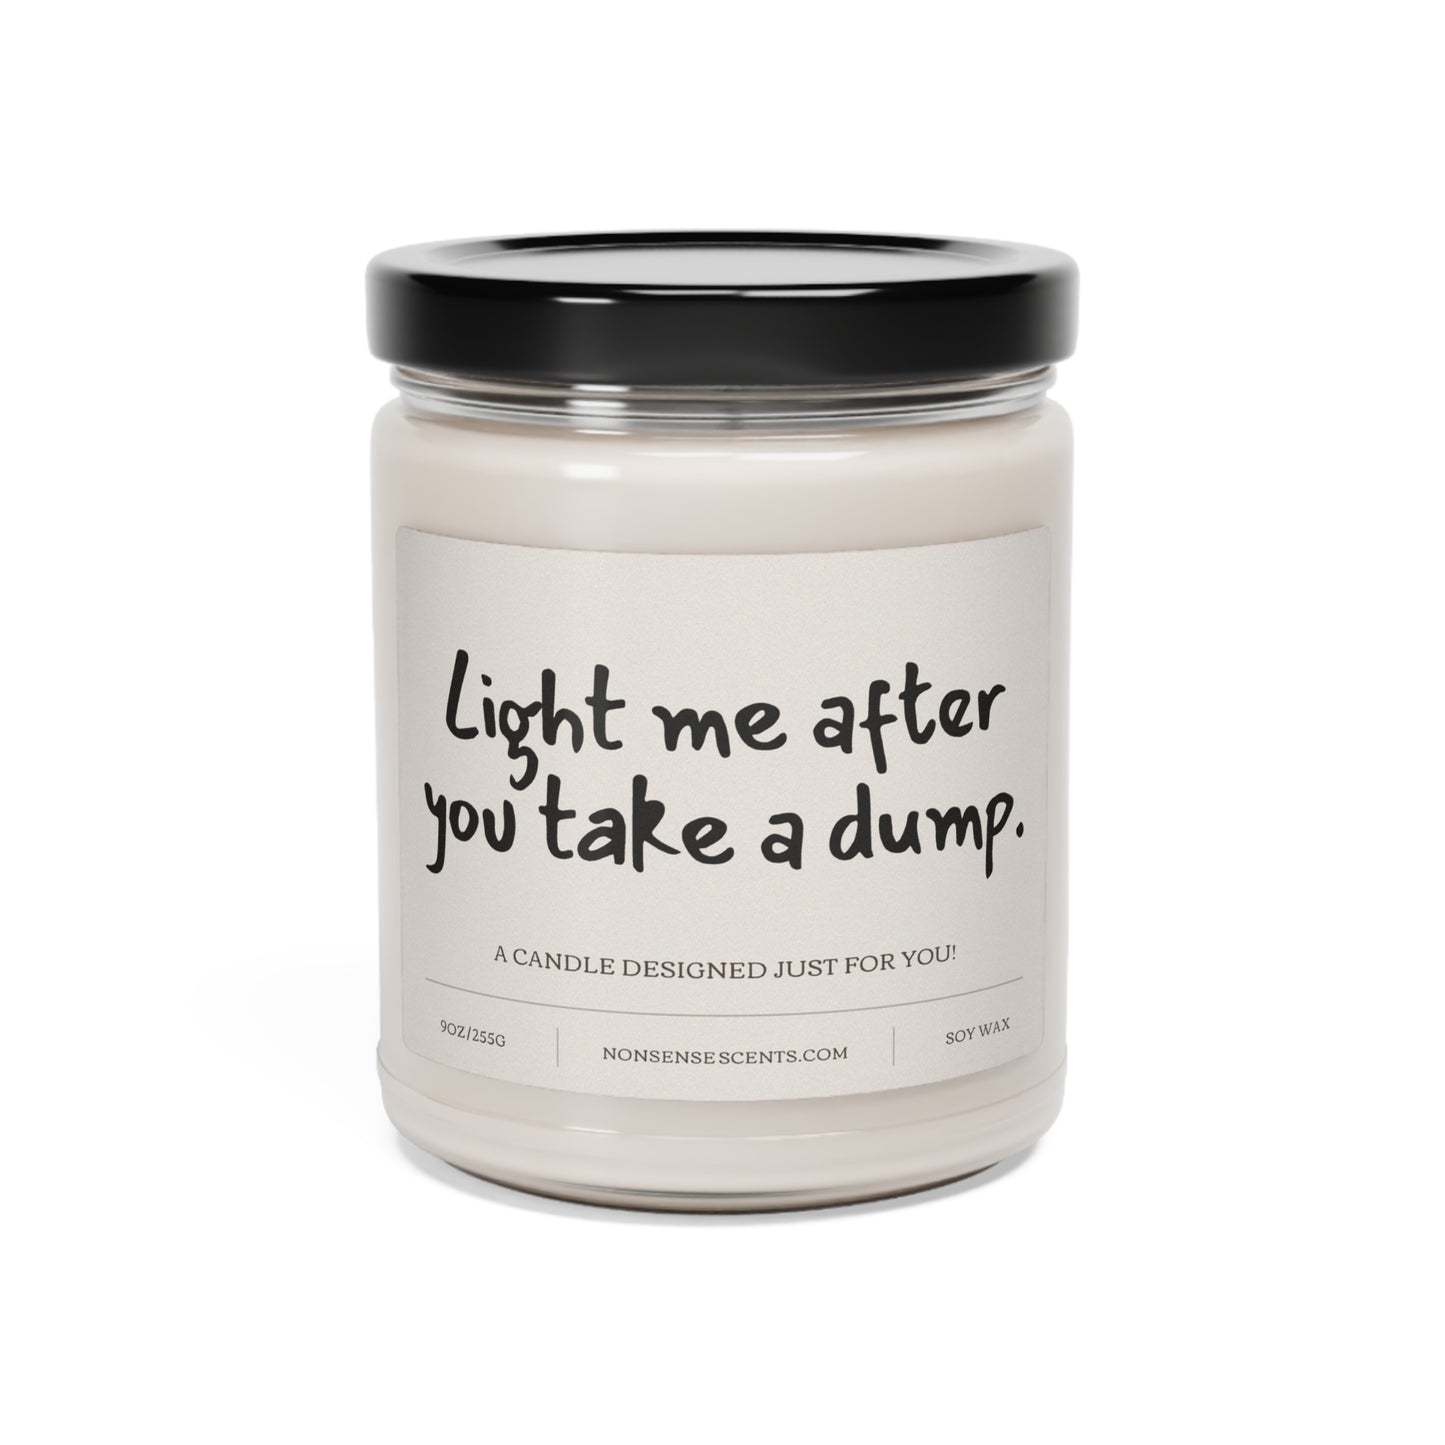 "Light Me After You Take A Dump" Scented Candle